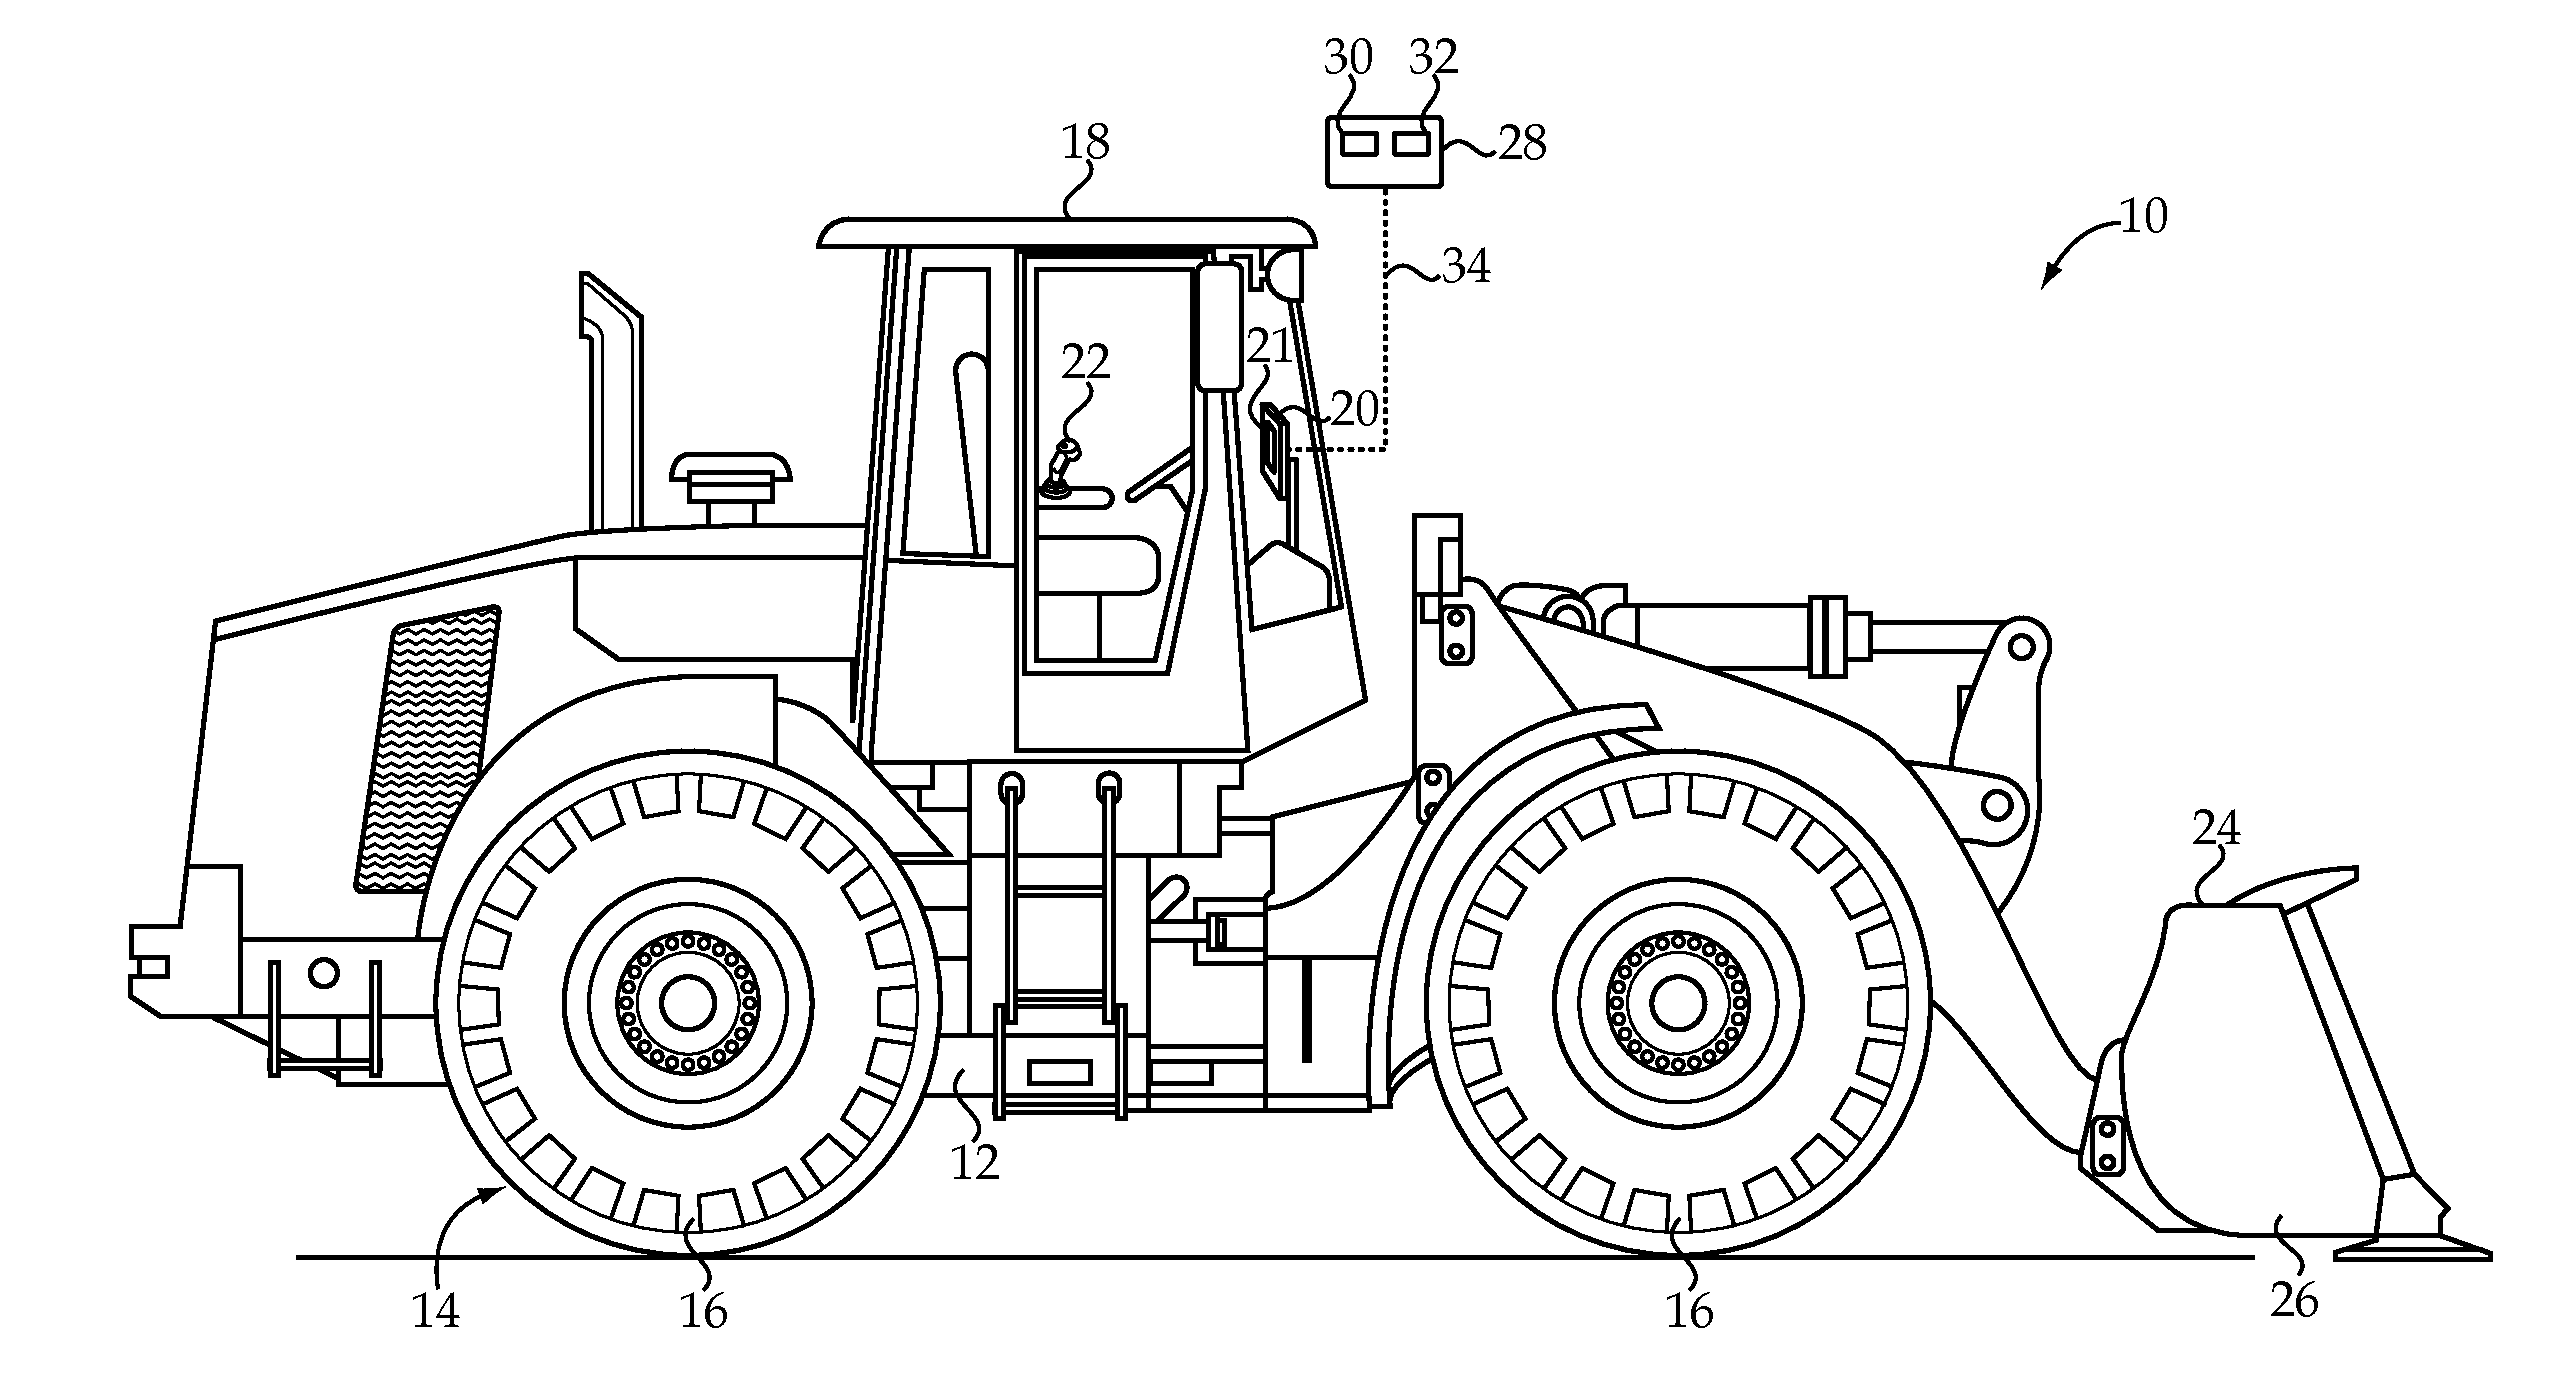 Payload material density calculation and machine using same